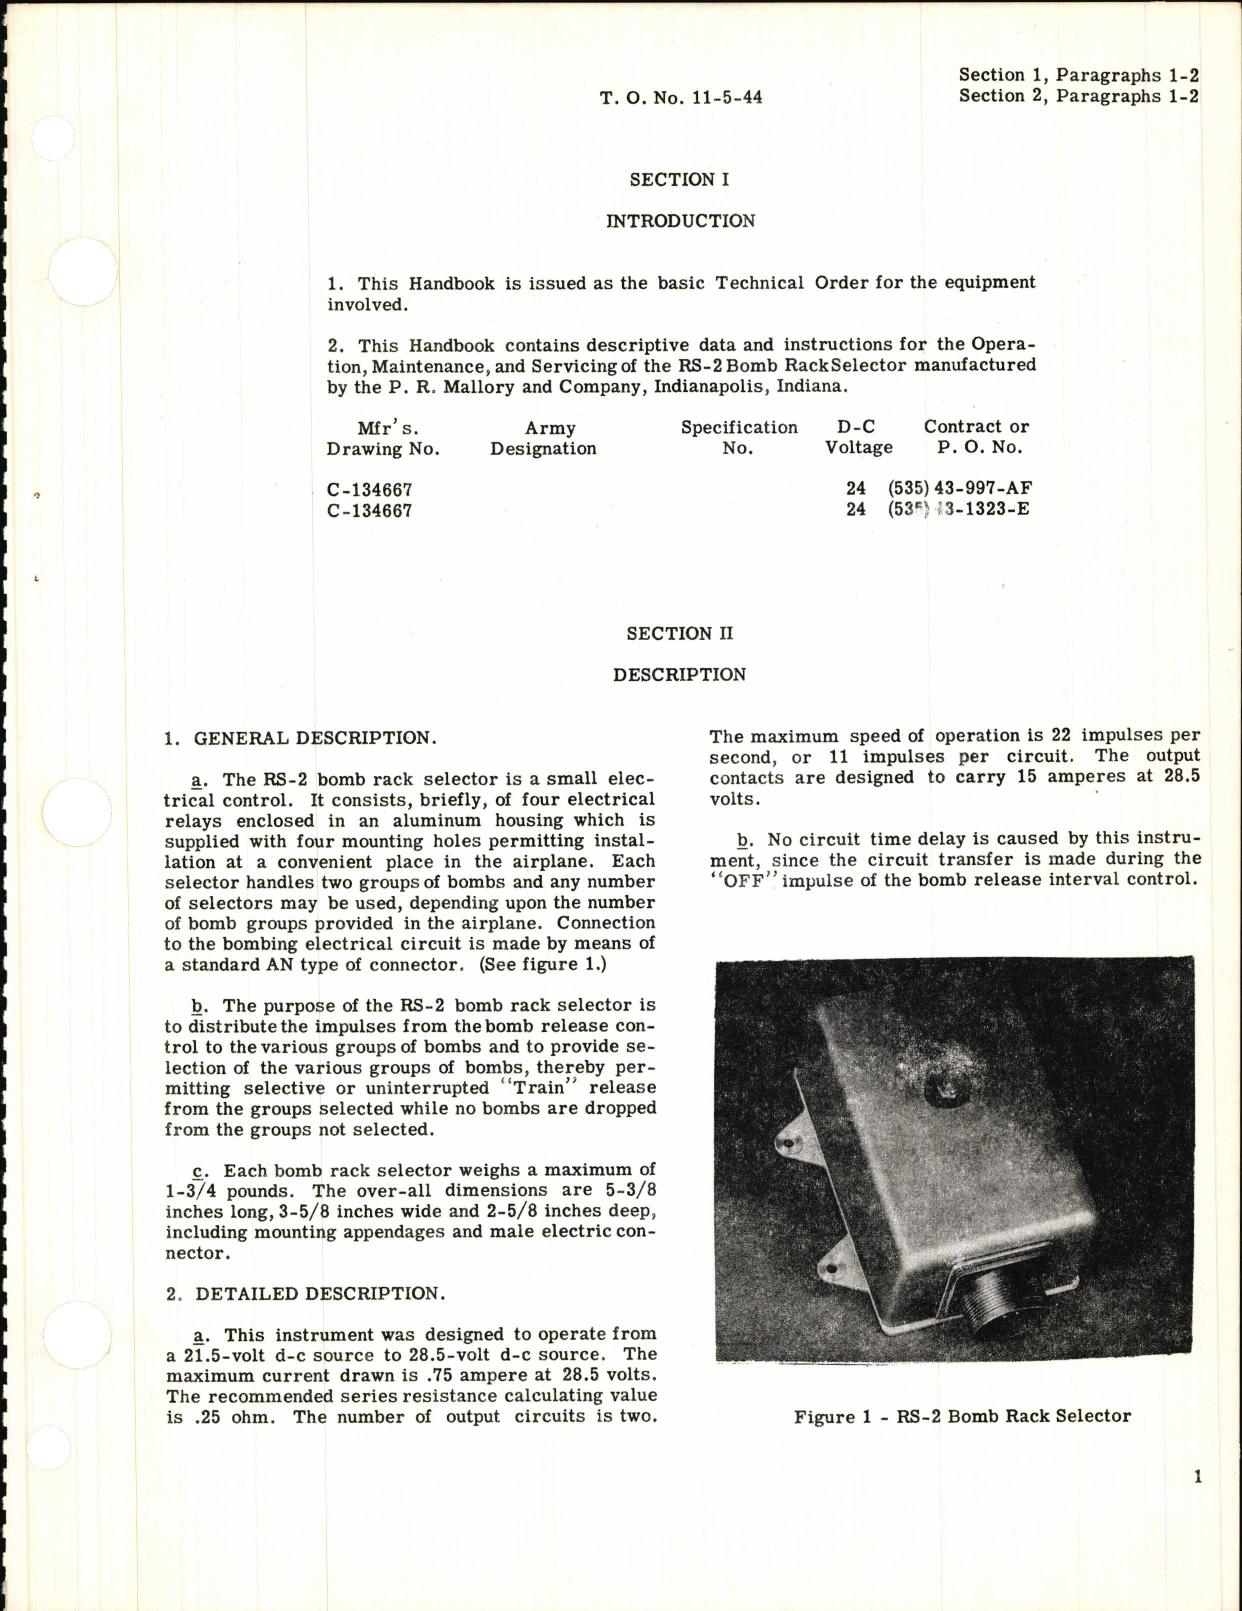 Sample page 5 from AirCorps Library document: Operation and Service Instructions for Bomb Rack Selector Model RS-2